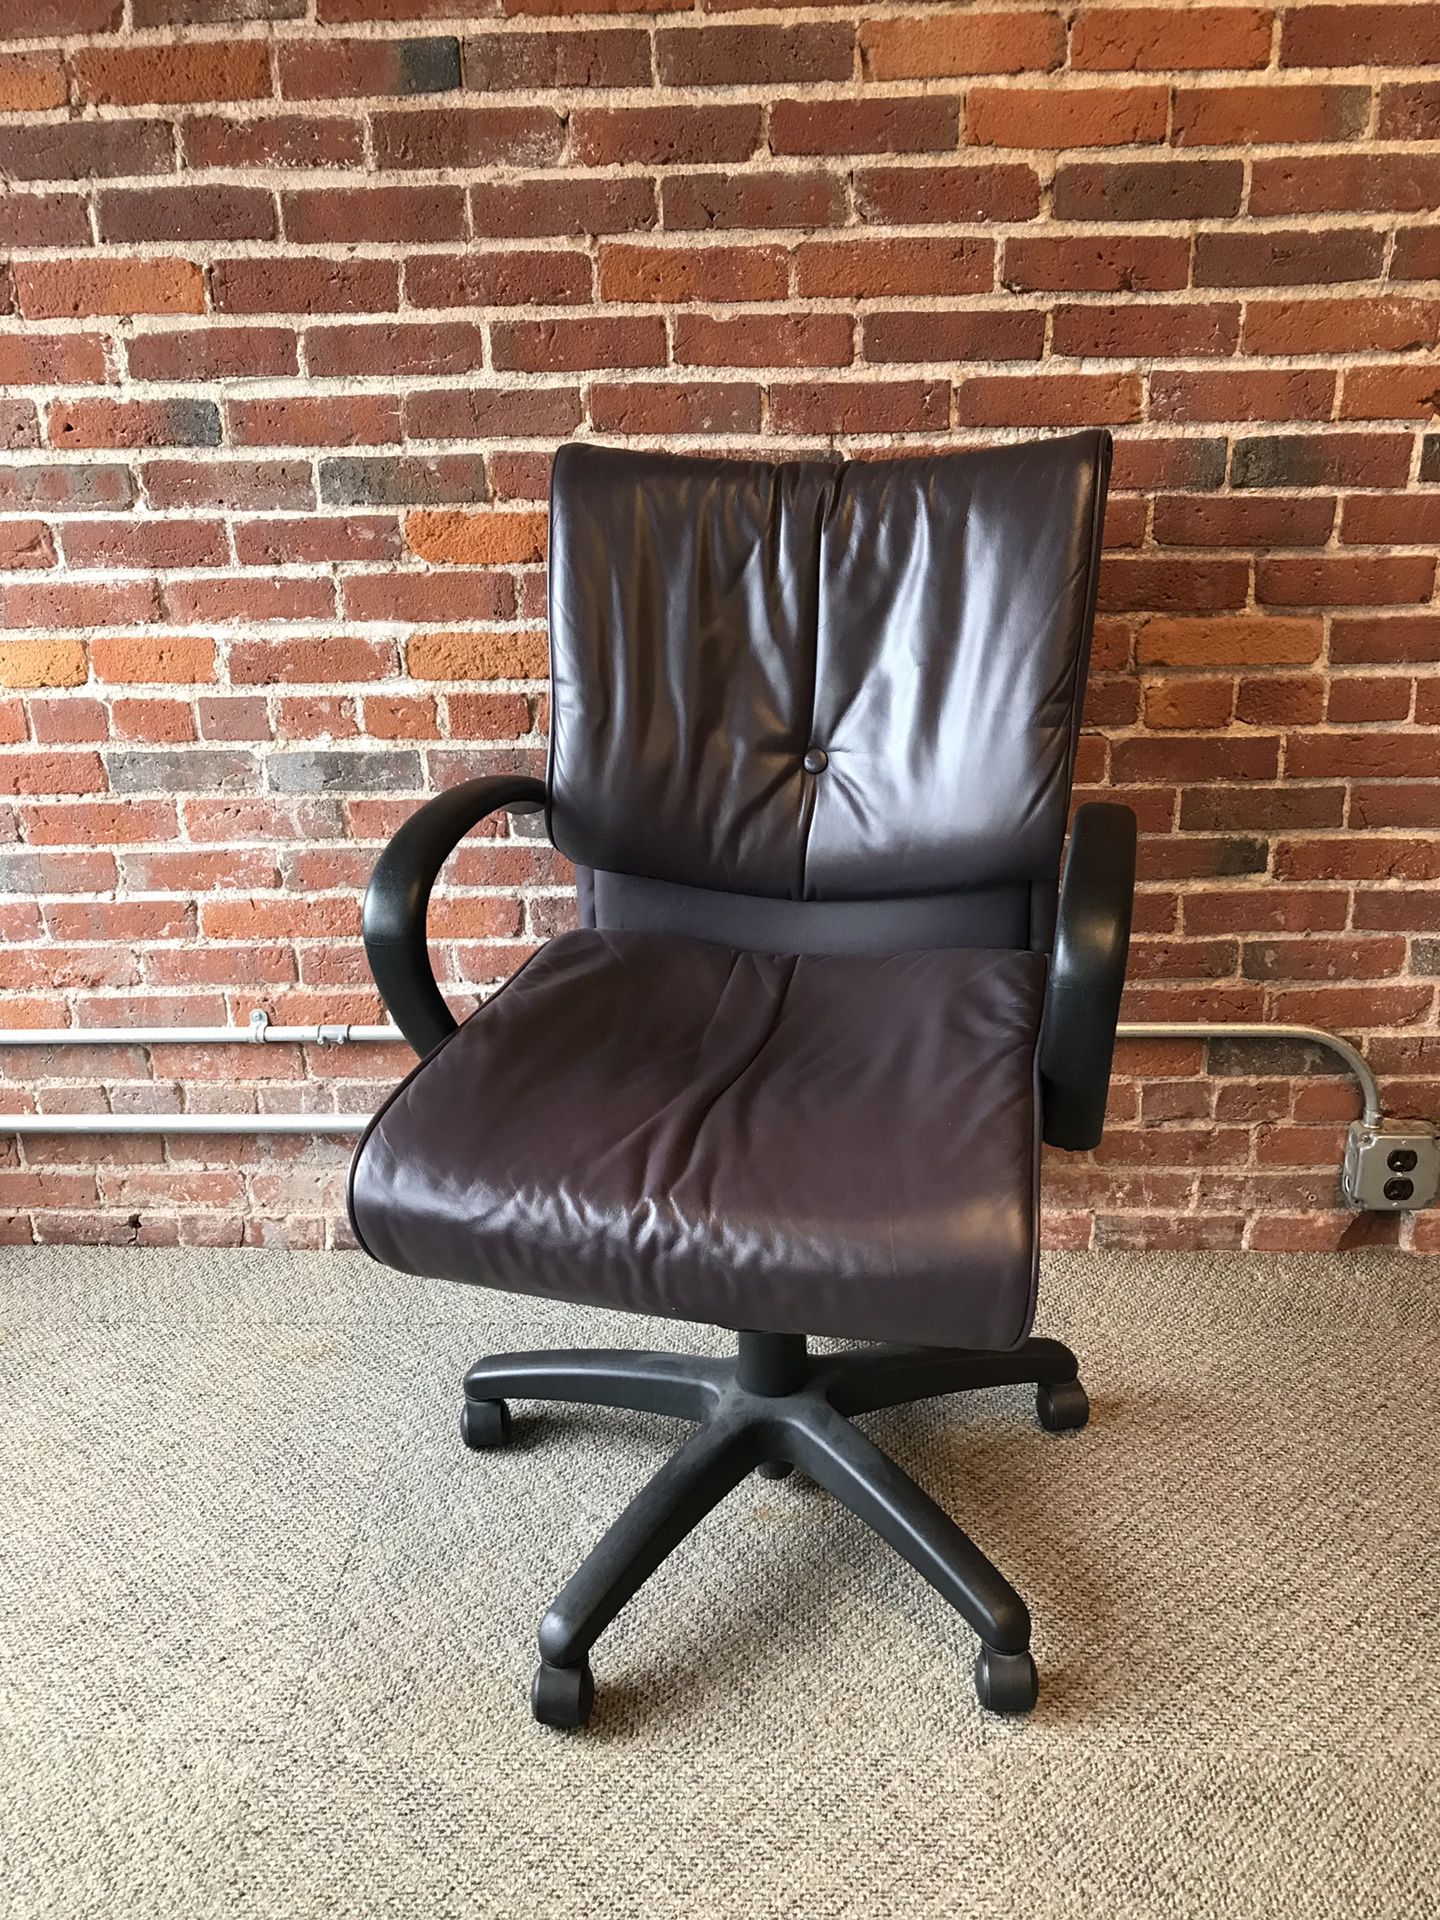 Comfy, adjustable office chair